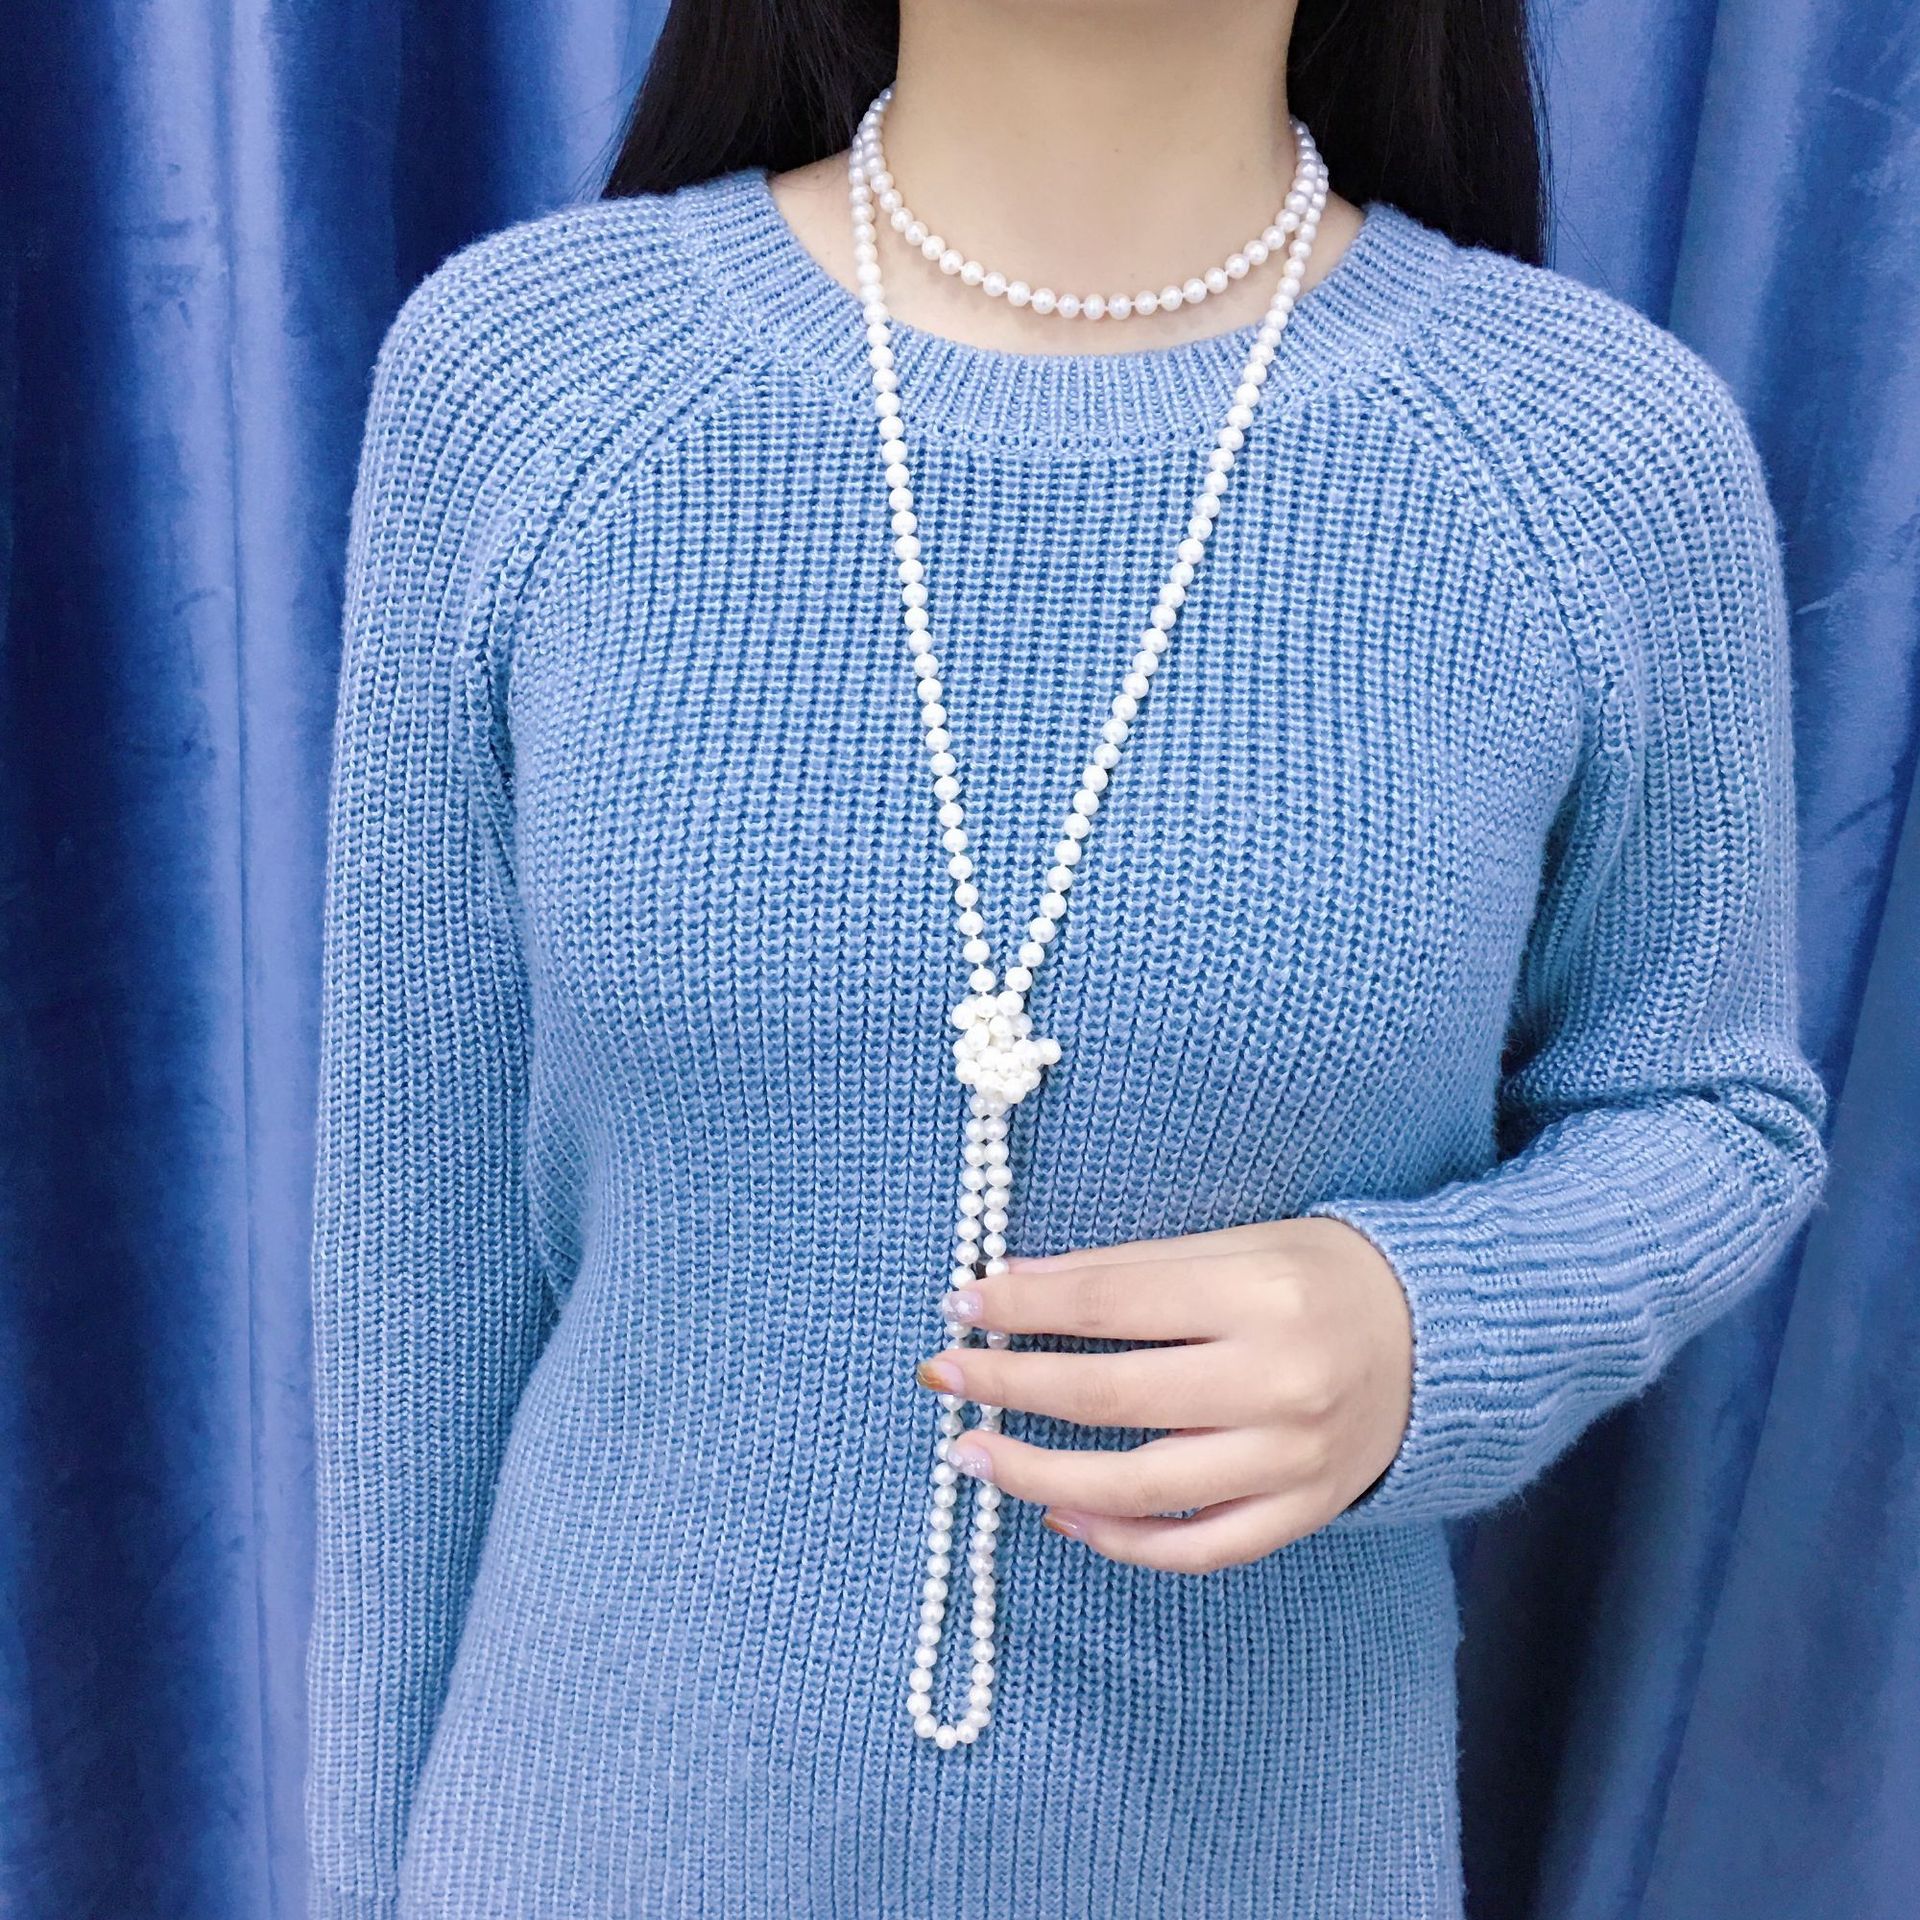 Commuter round tian Freshwater pearls sweater chain Necklace A Manufactor goods in stock On behalf of